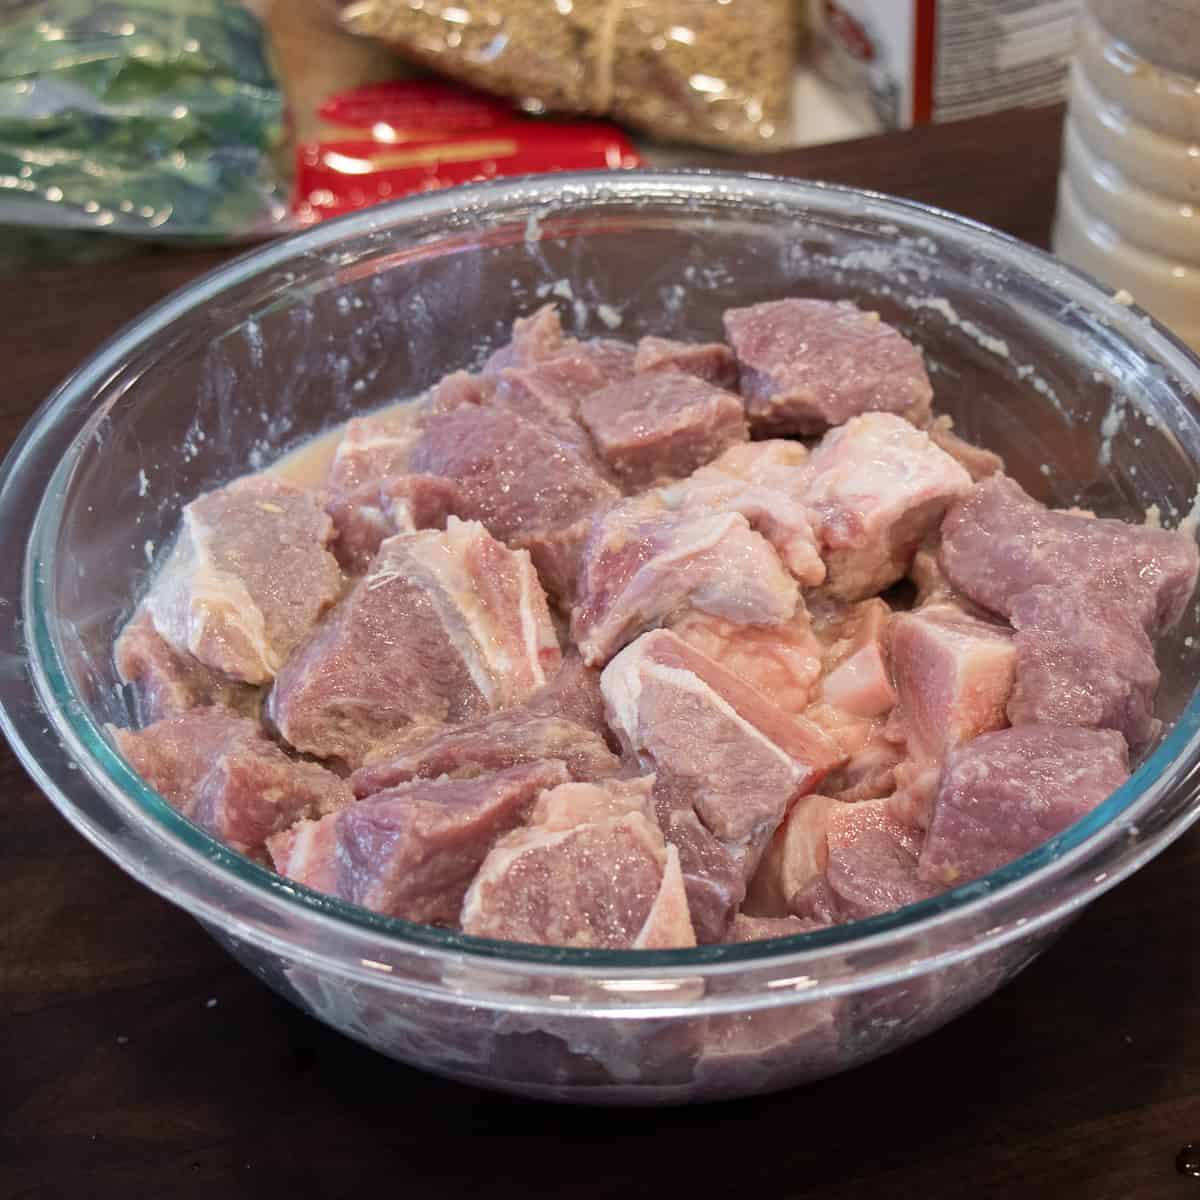 Veal shoulder or stewing meat cut into cubes.